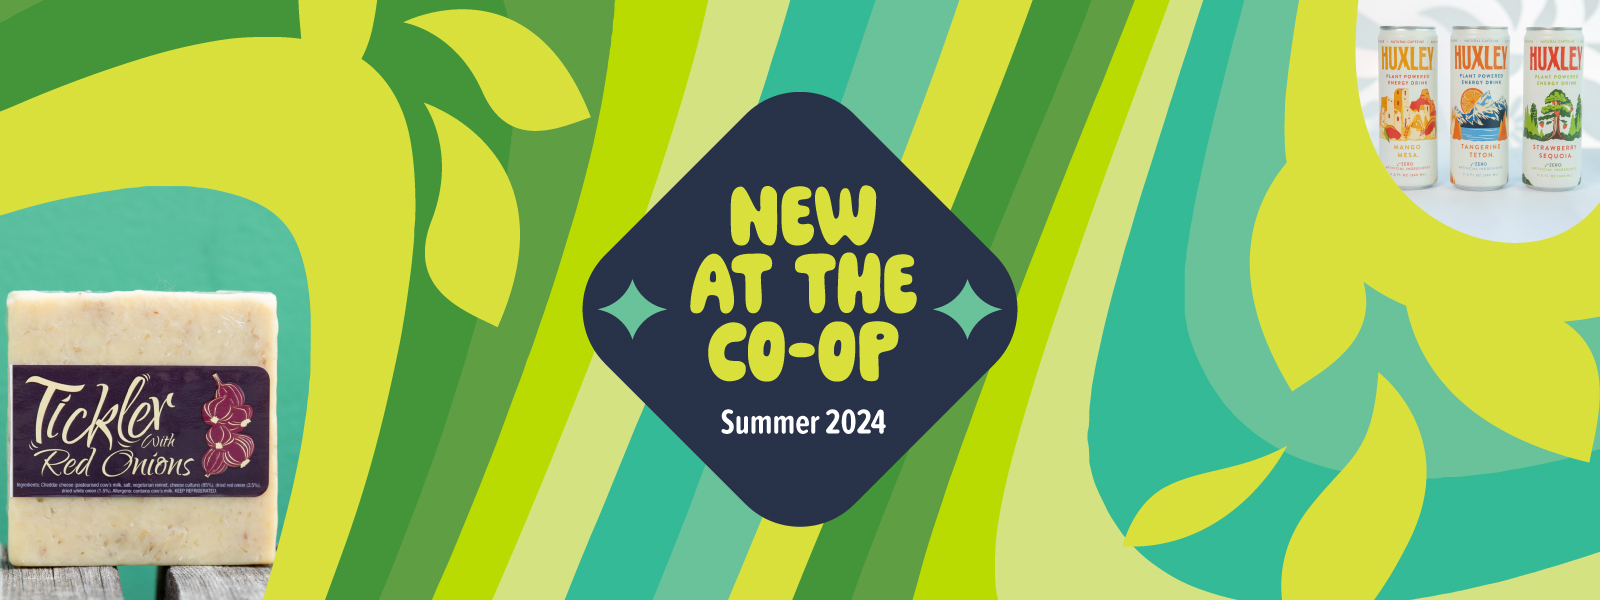 A colorful graphic that reads "New at the Co-op Summer 2024" and has a photo of Tickler Red Onion Cheddar and Huxley Energy Drinks